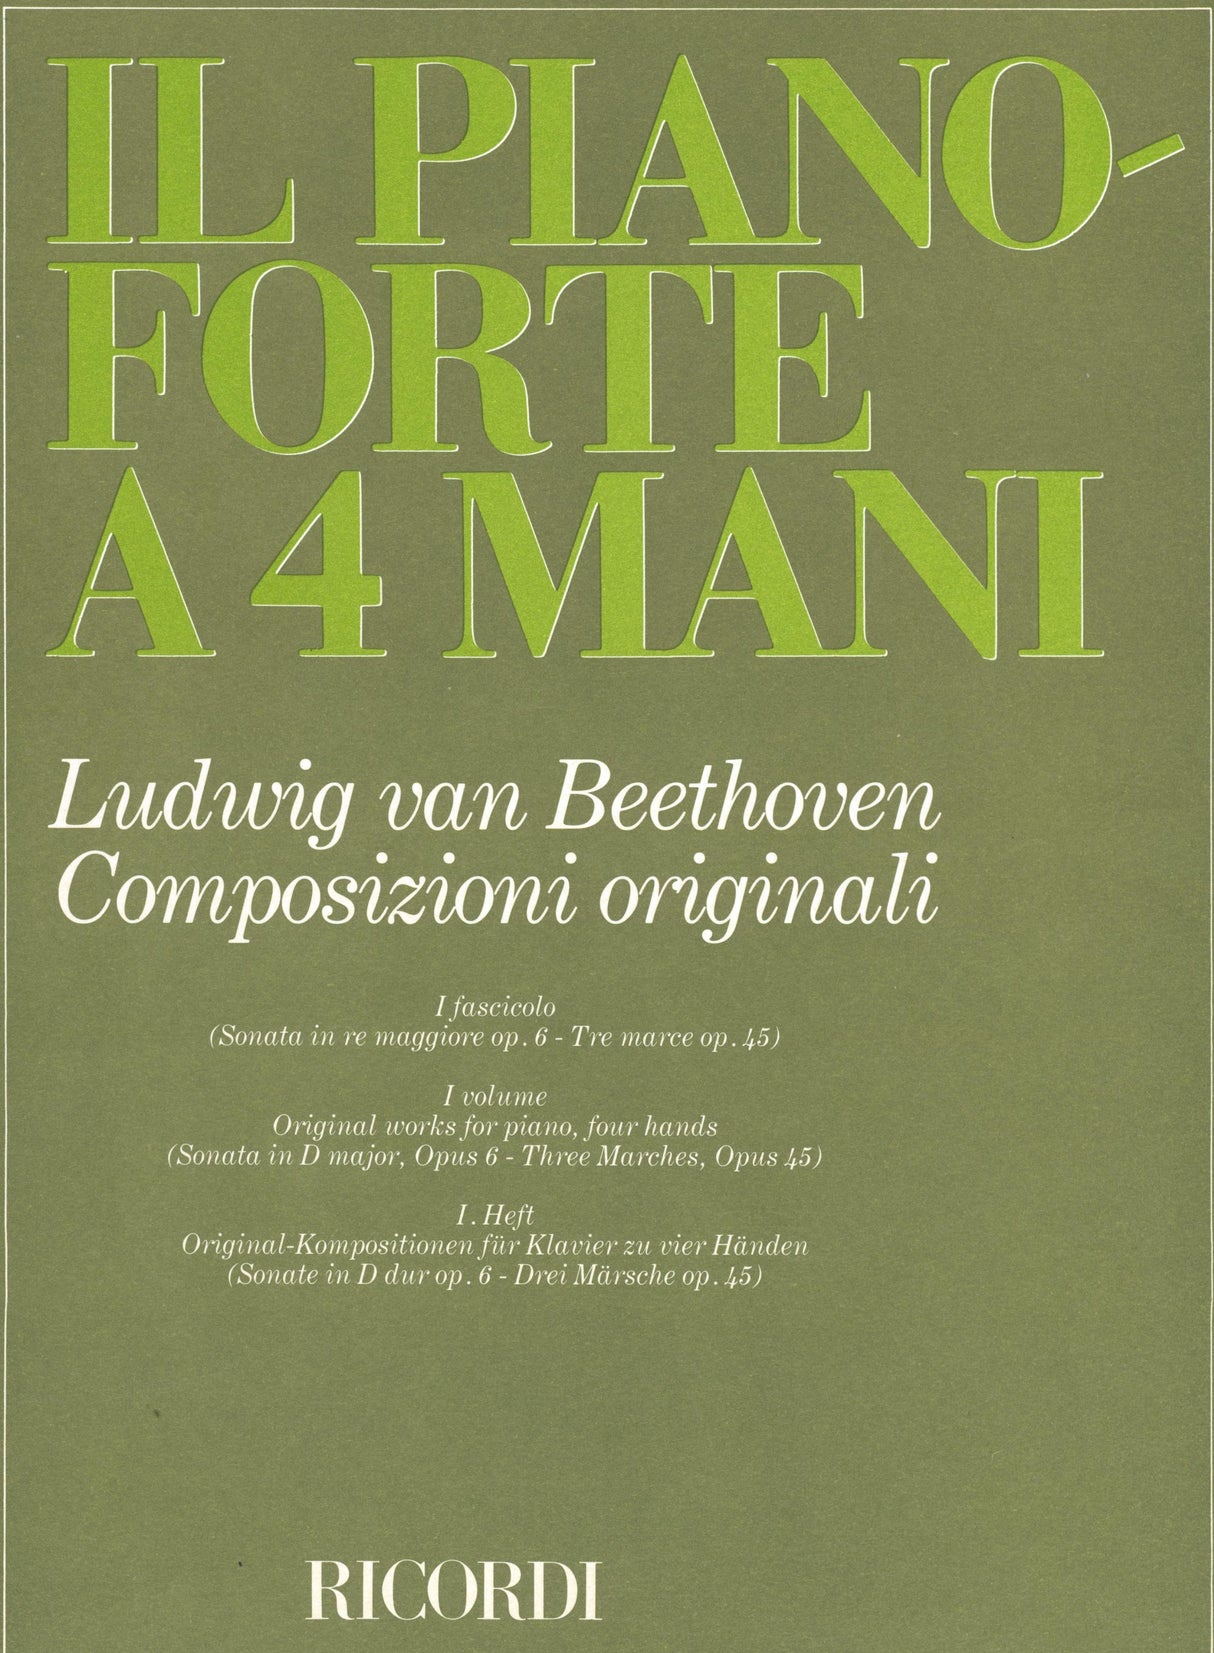 Beethoven: Original Compositions for Piano 4-Hands - Volume 1 (Opp. 6 & 45)